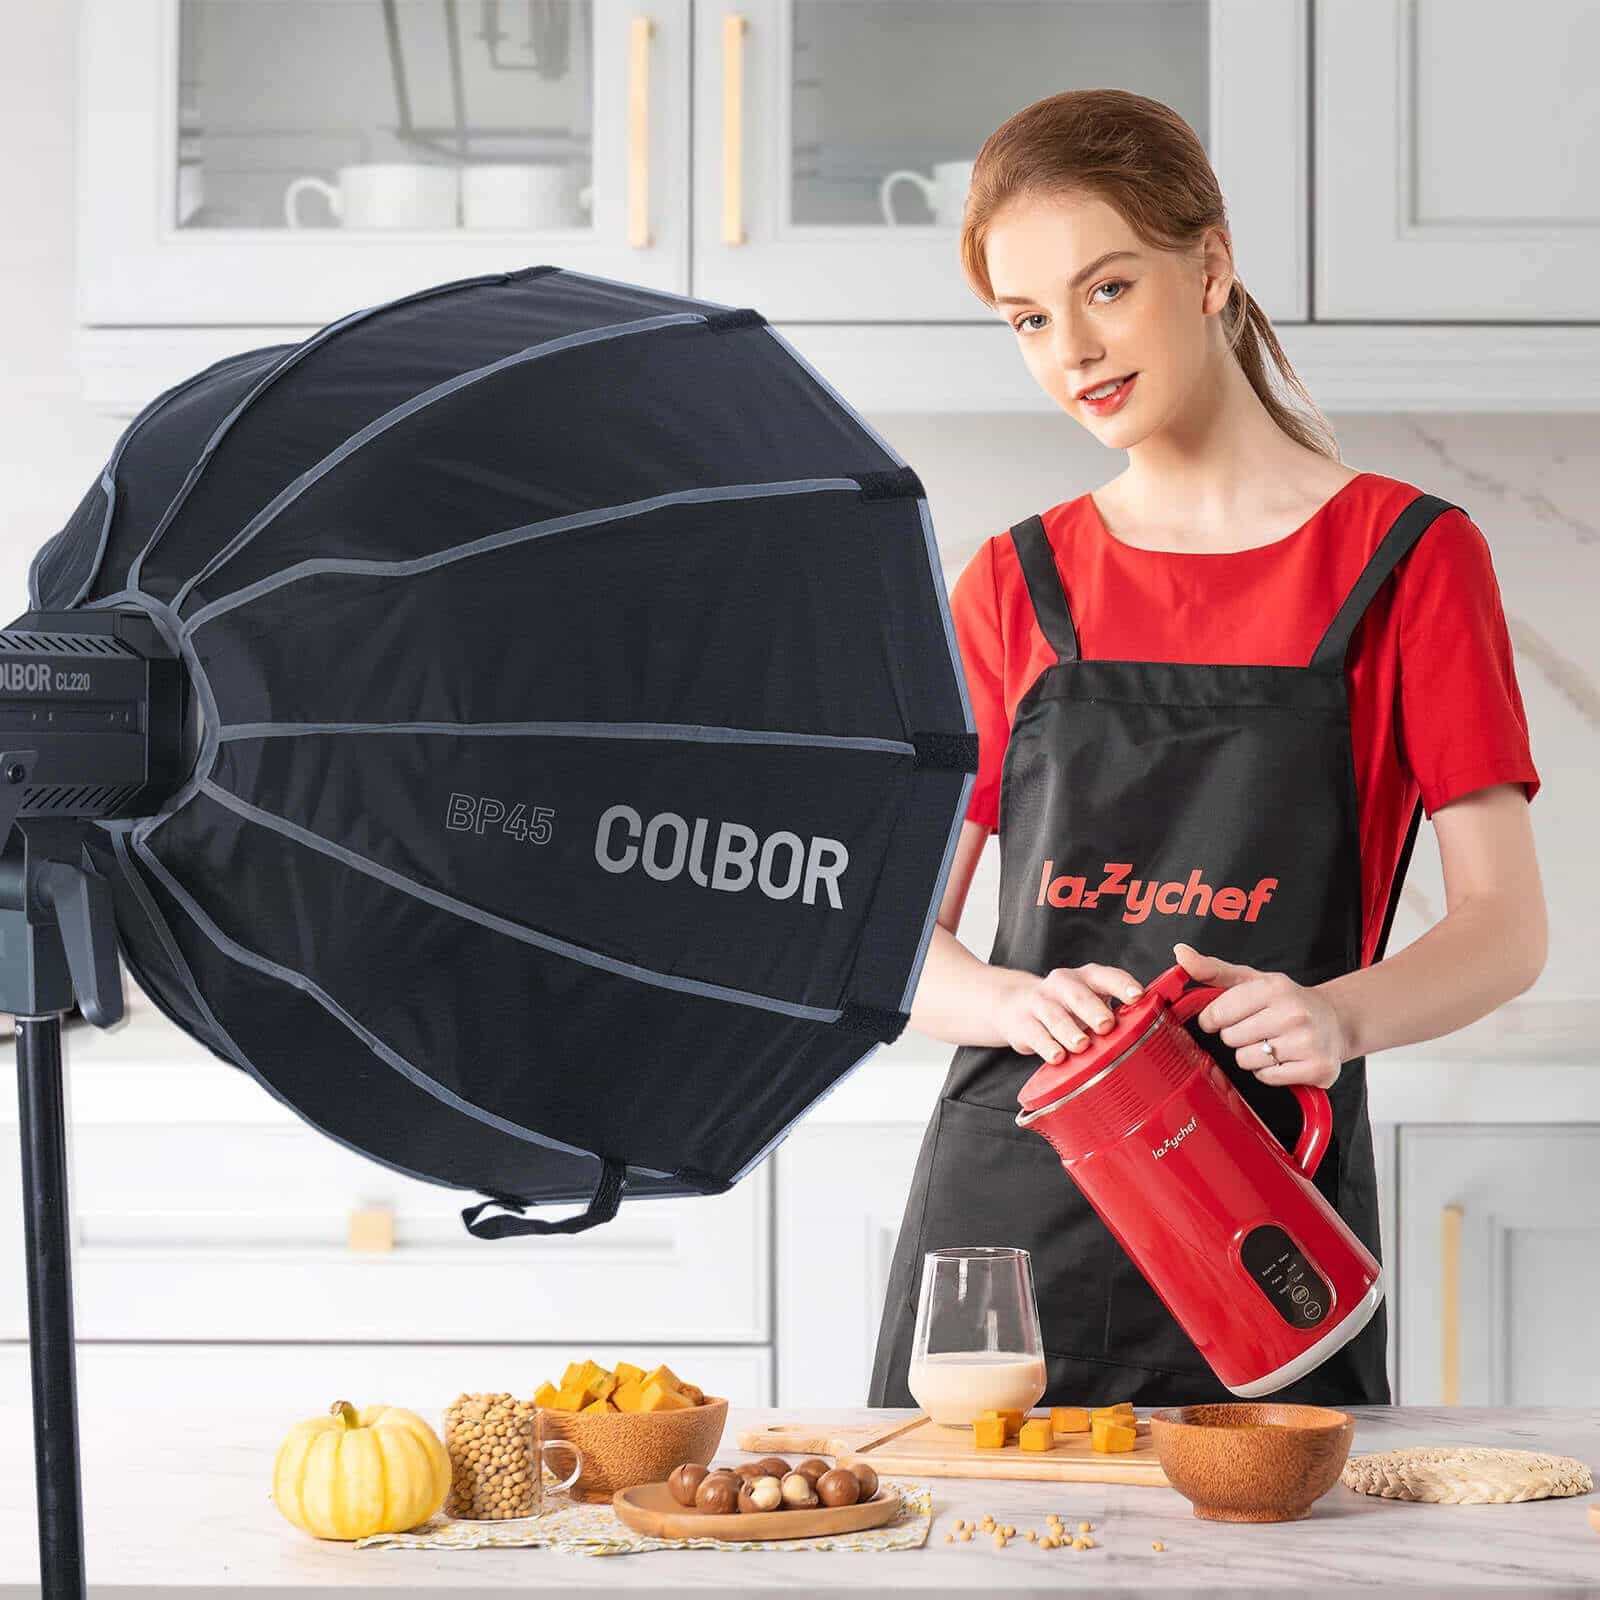 COLBOR BP45 can be used in the lighting setup for food videos.